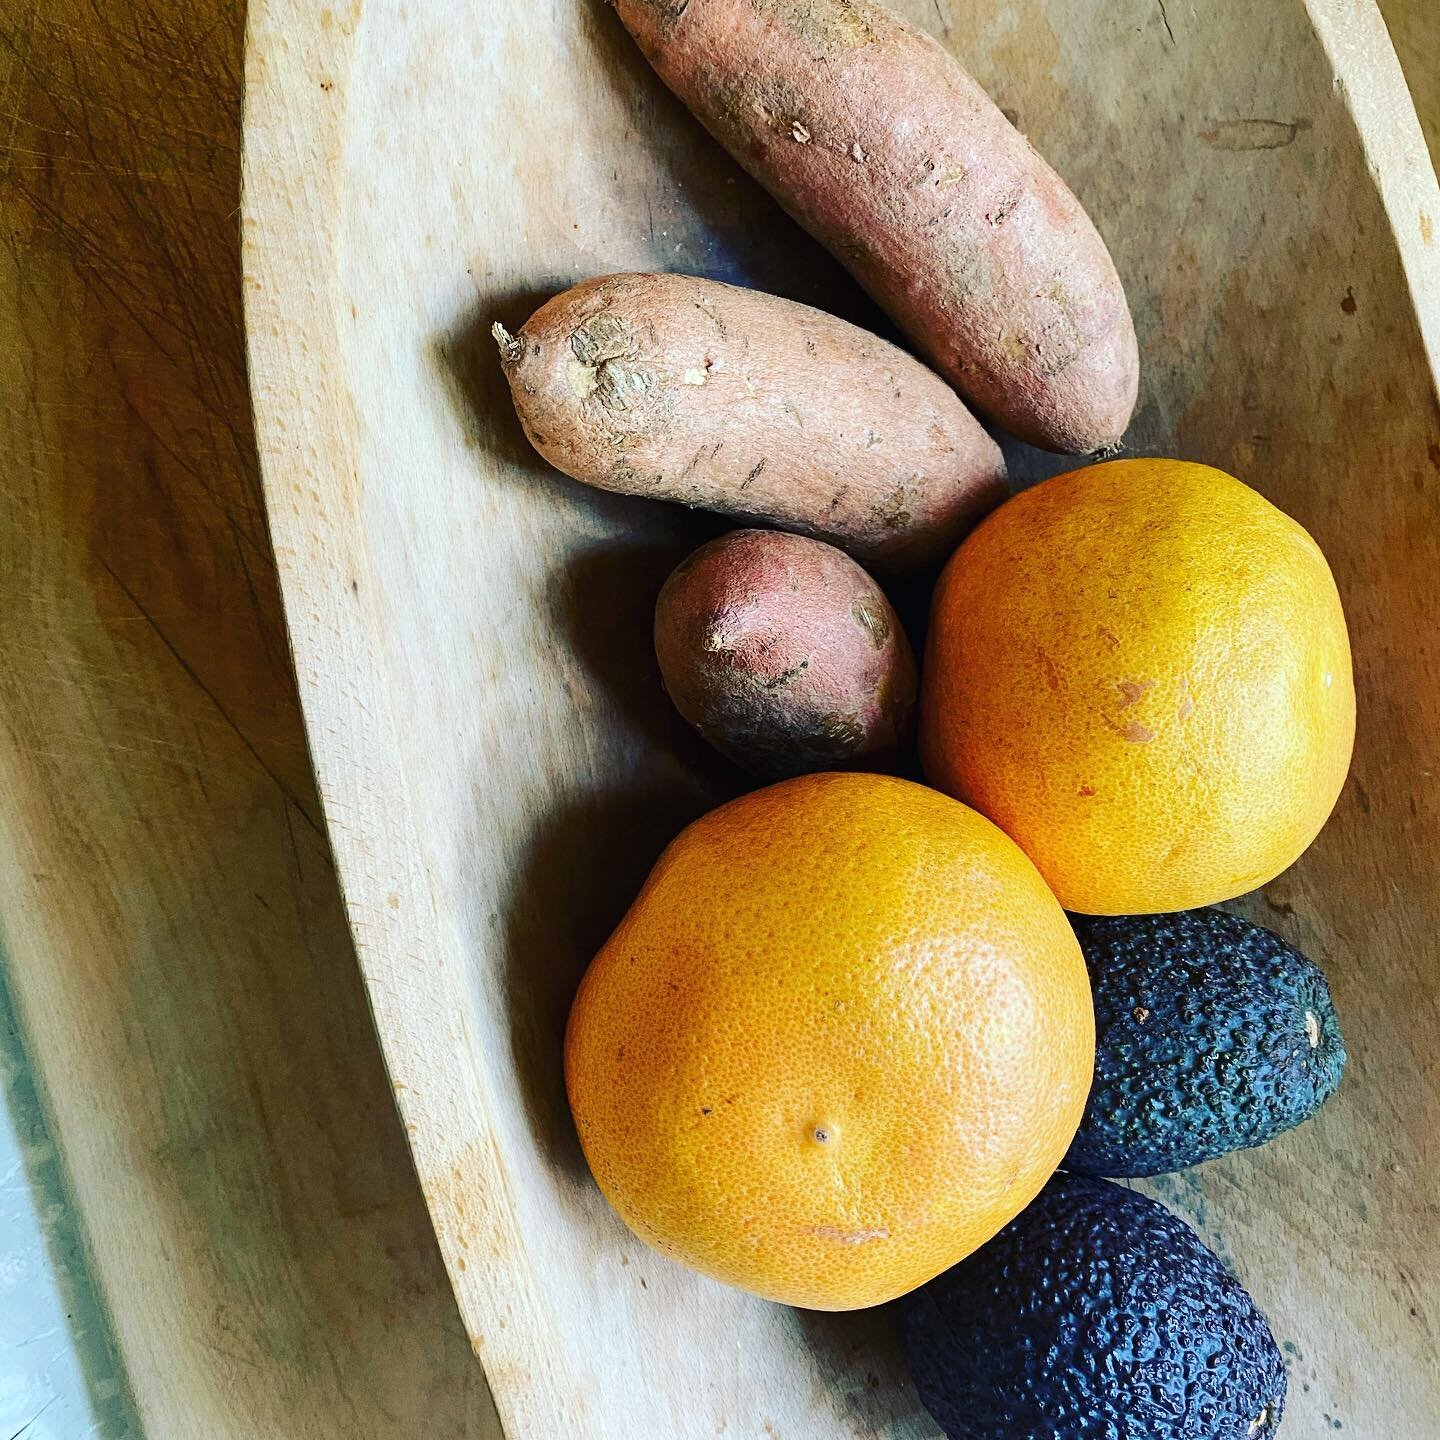 Trifecta ✨
✨sweet potatoes are great for roasting, saut&eacute;ing and soup bases 
✨grapefruits are great for snacking, and squeezing into drinks 
✨avocados are great for guacamole, slices, toast, and blending into sauces
🟠
🟡
🟢
#nutritiontips #sau